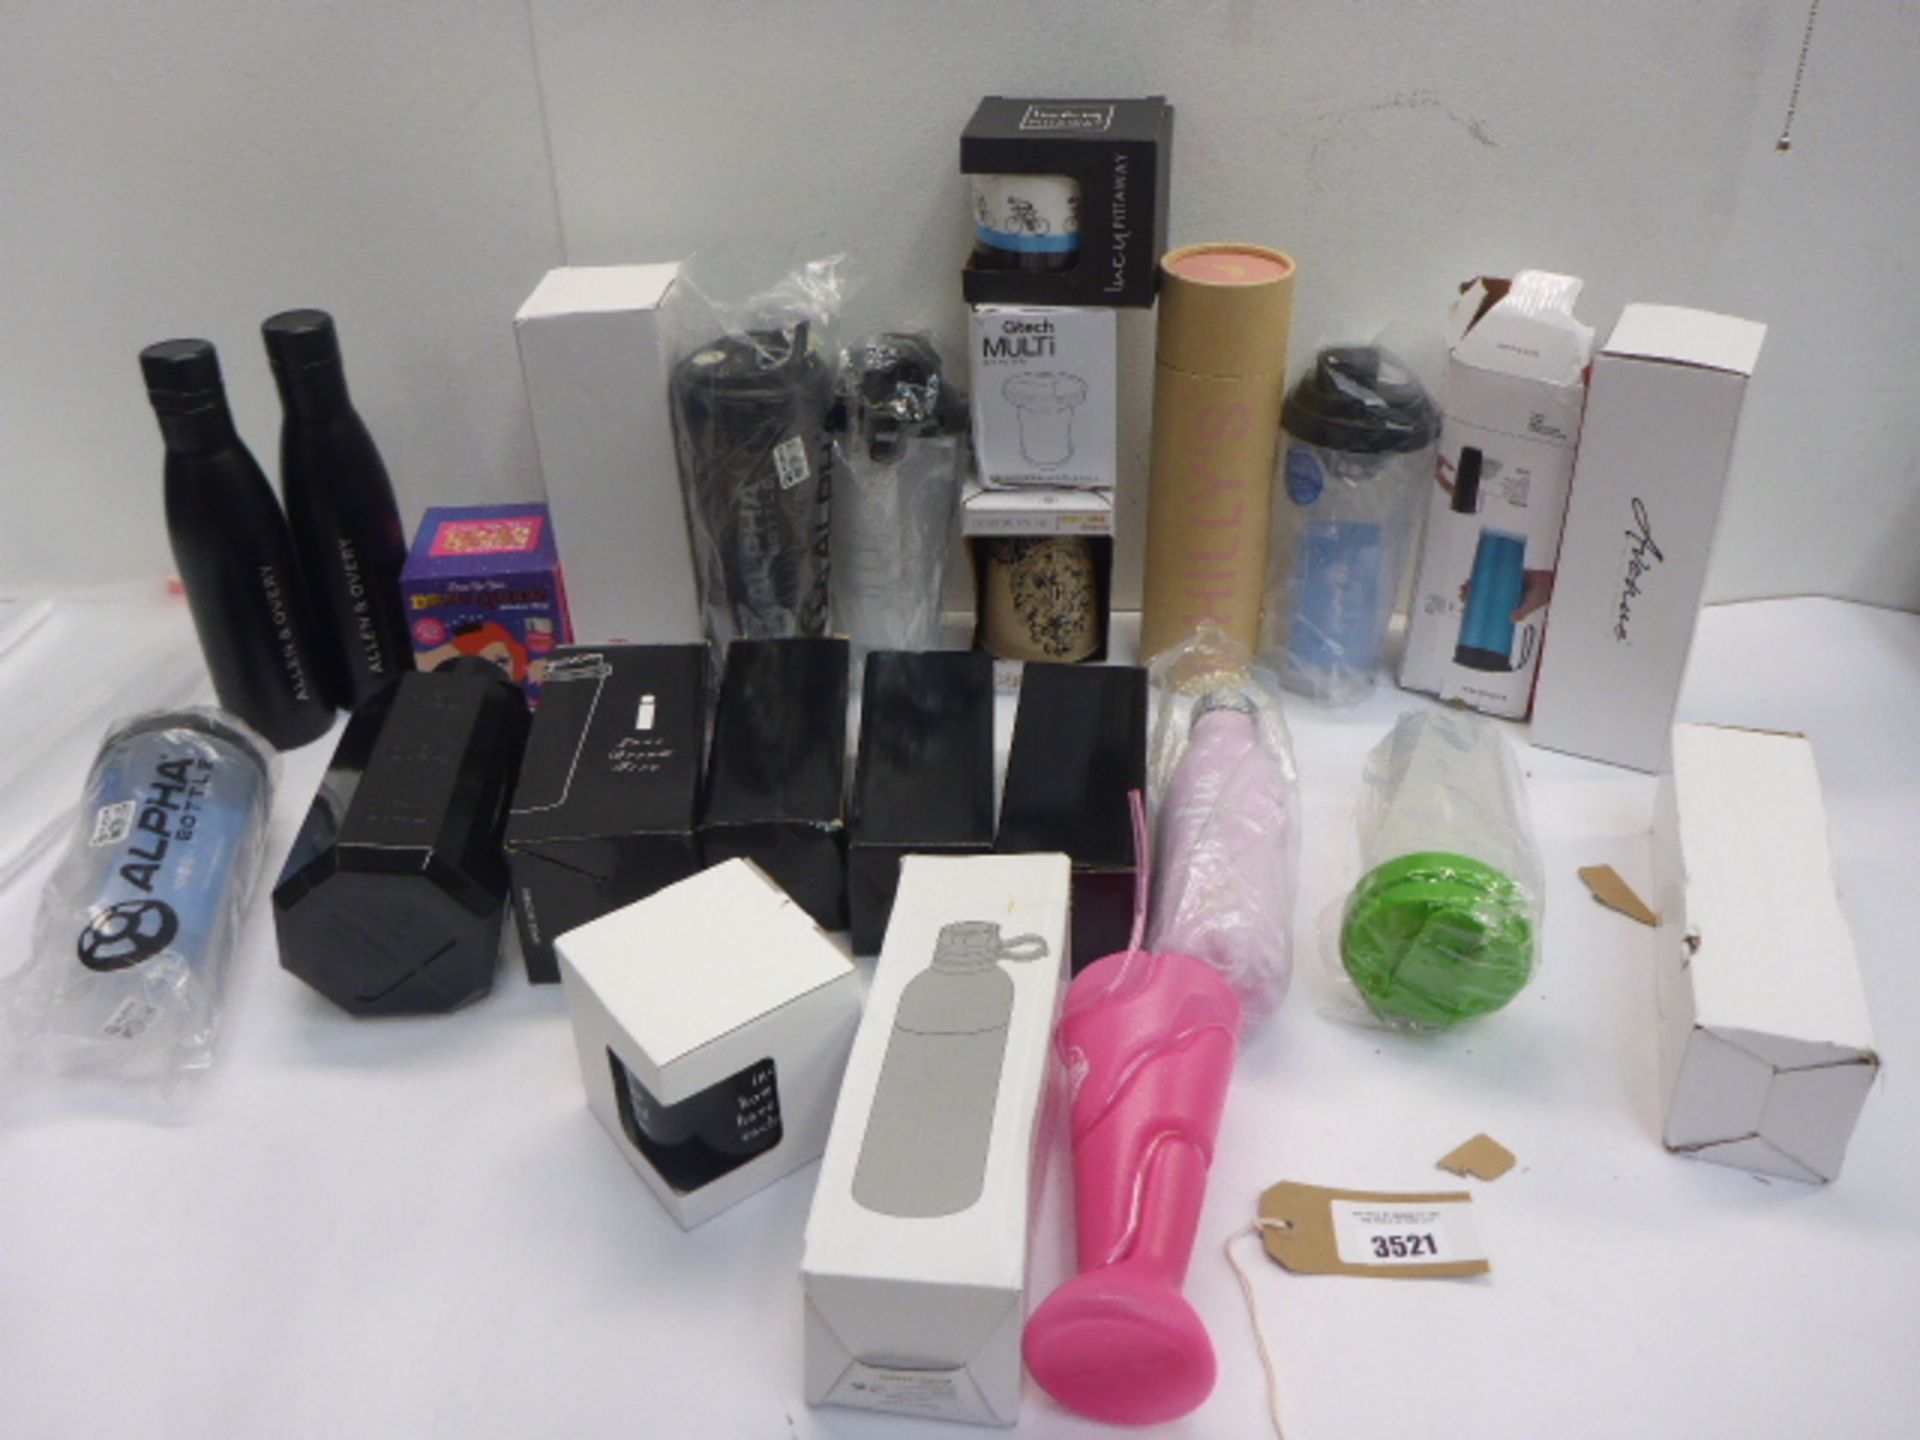 Selection of coffee & travel mugs, Allen & Overy, Chilly and other water bottles